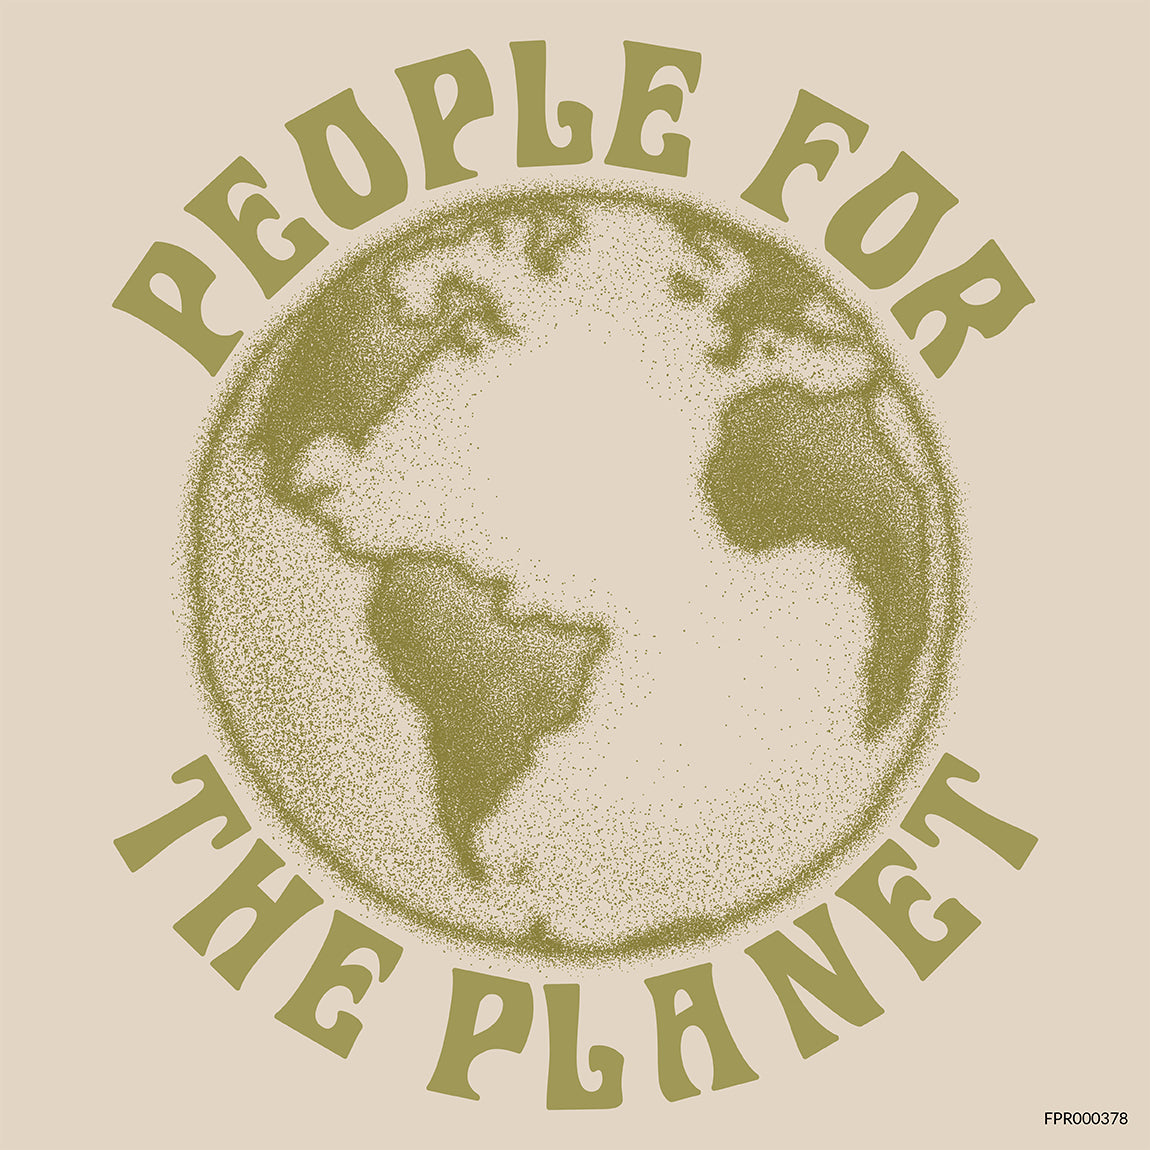 People for the Planet